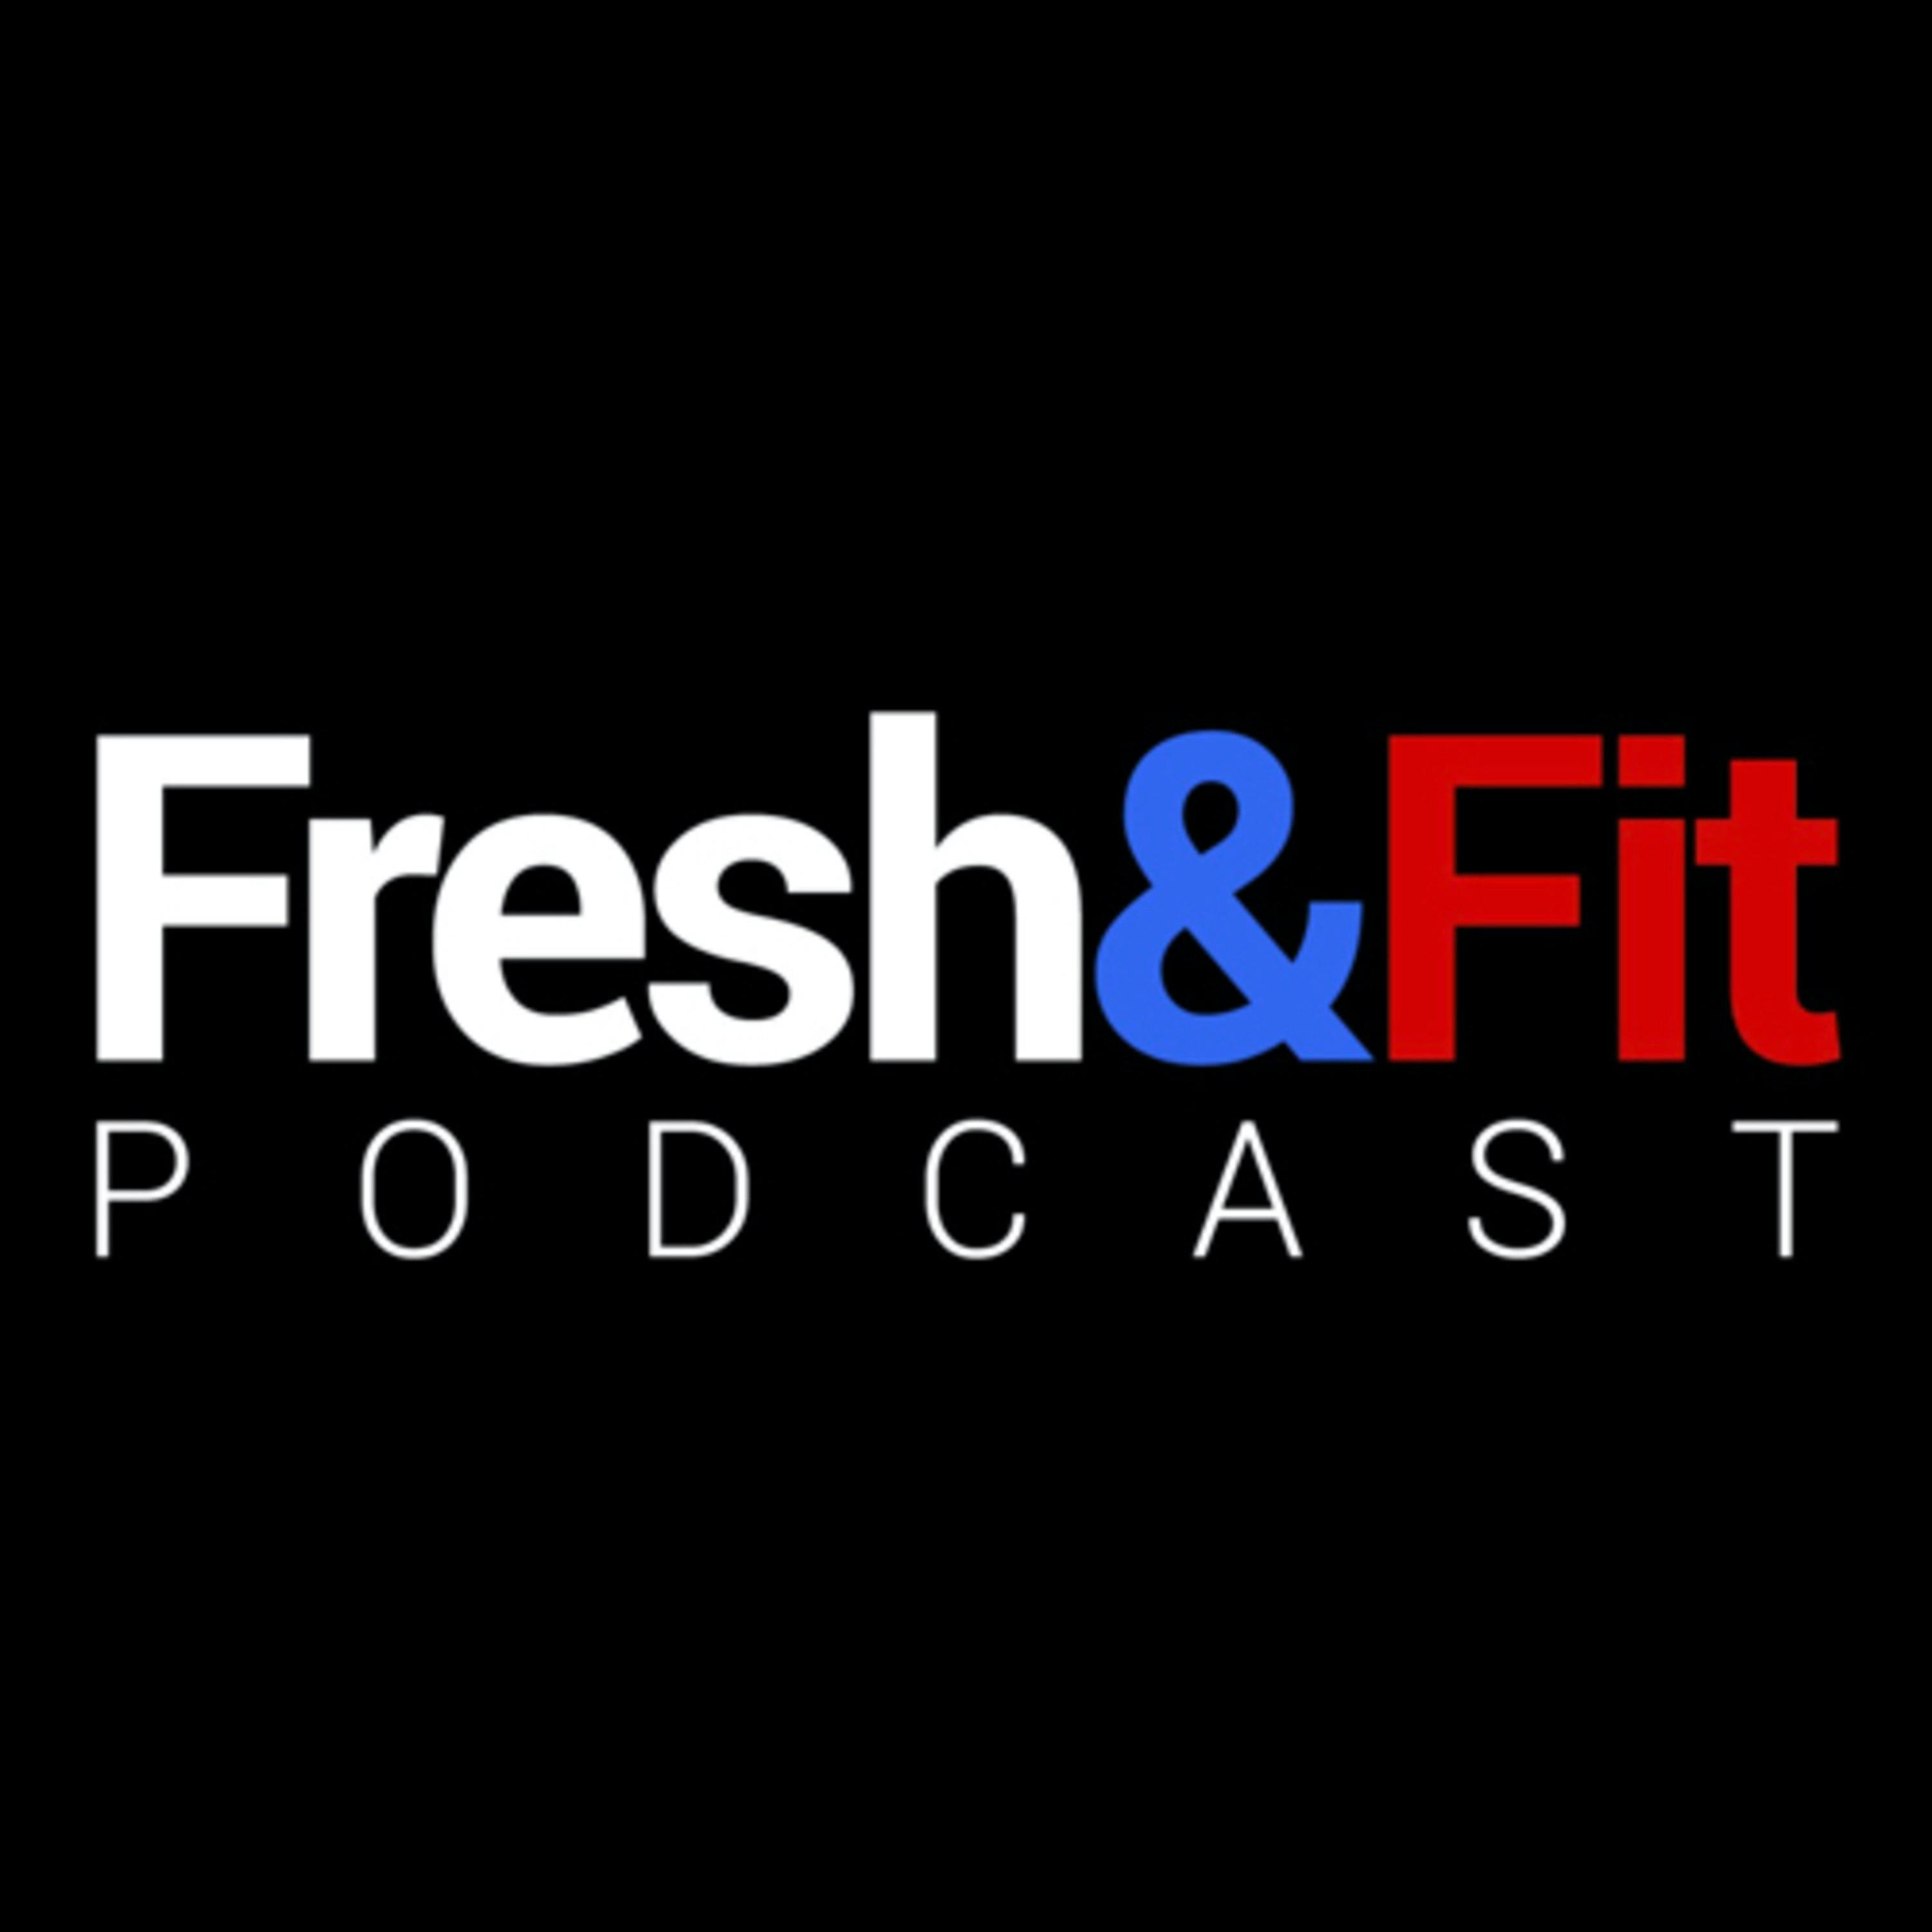 Fresh&Fit Podcast:Fresh&Fit Podcast